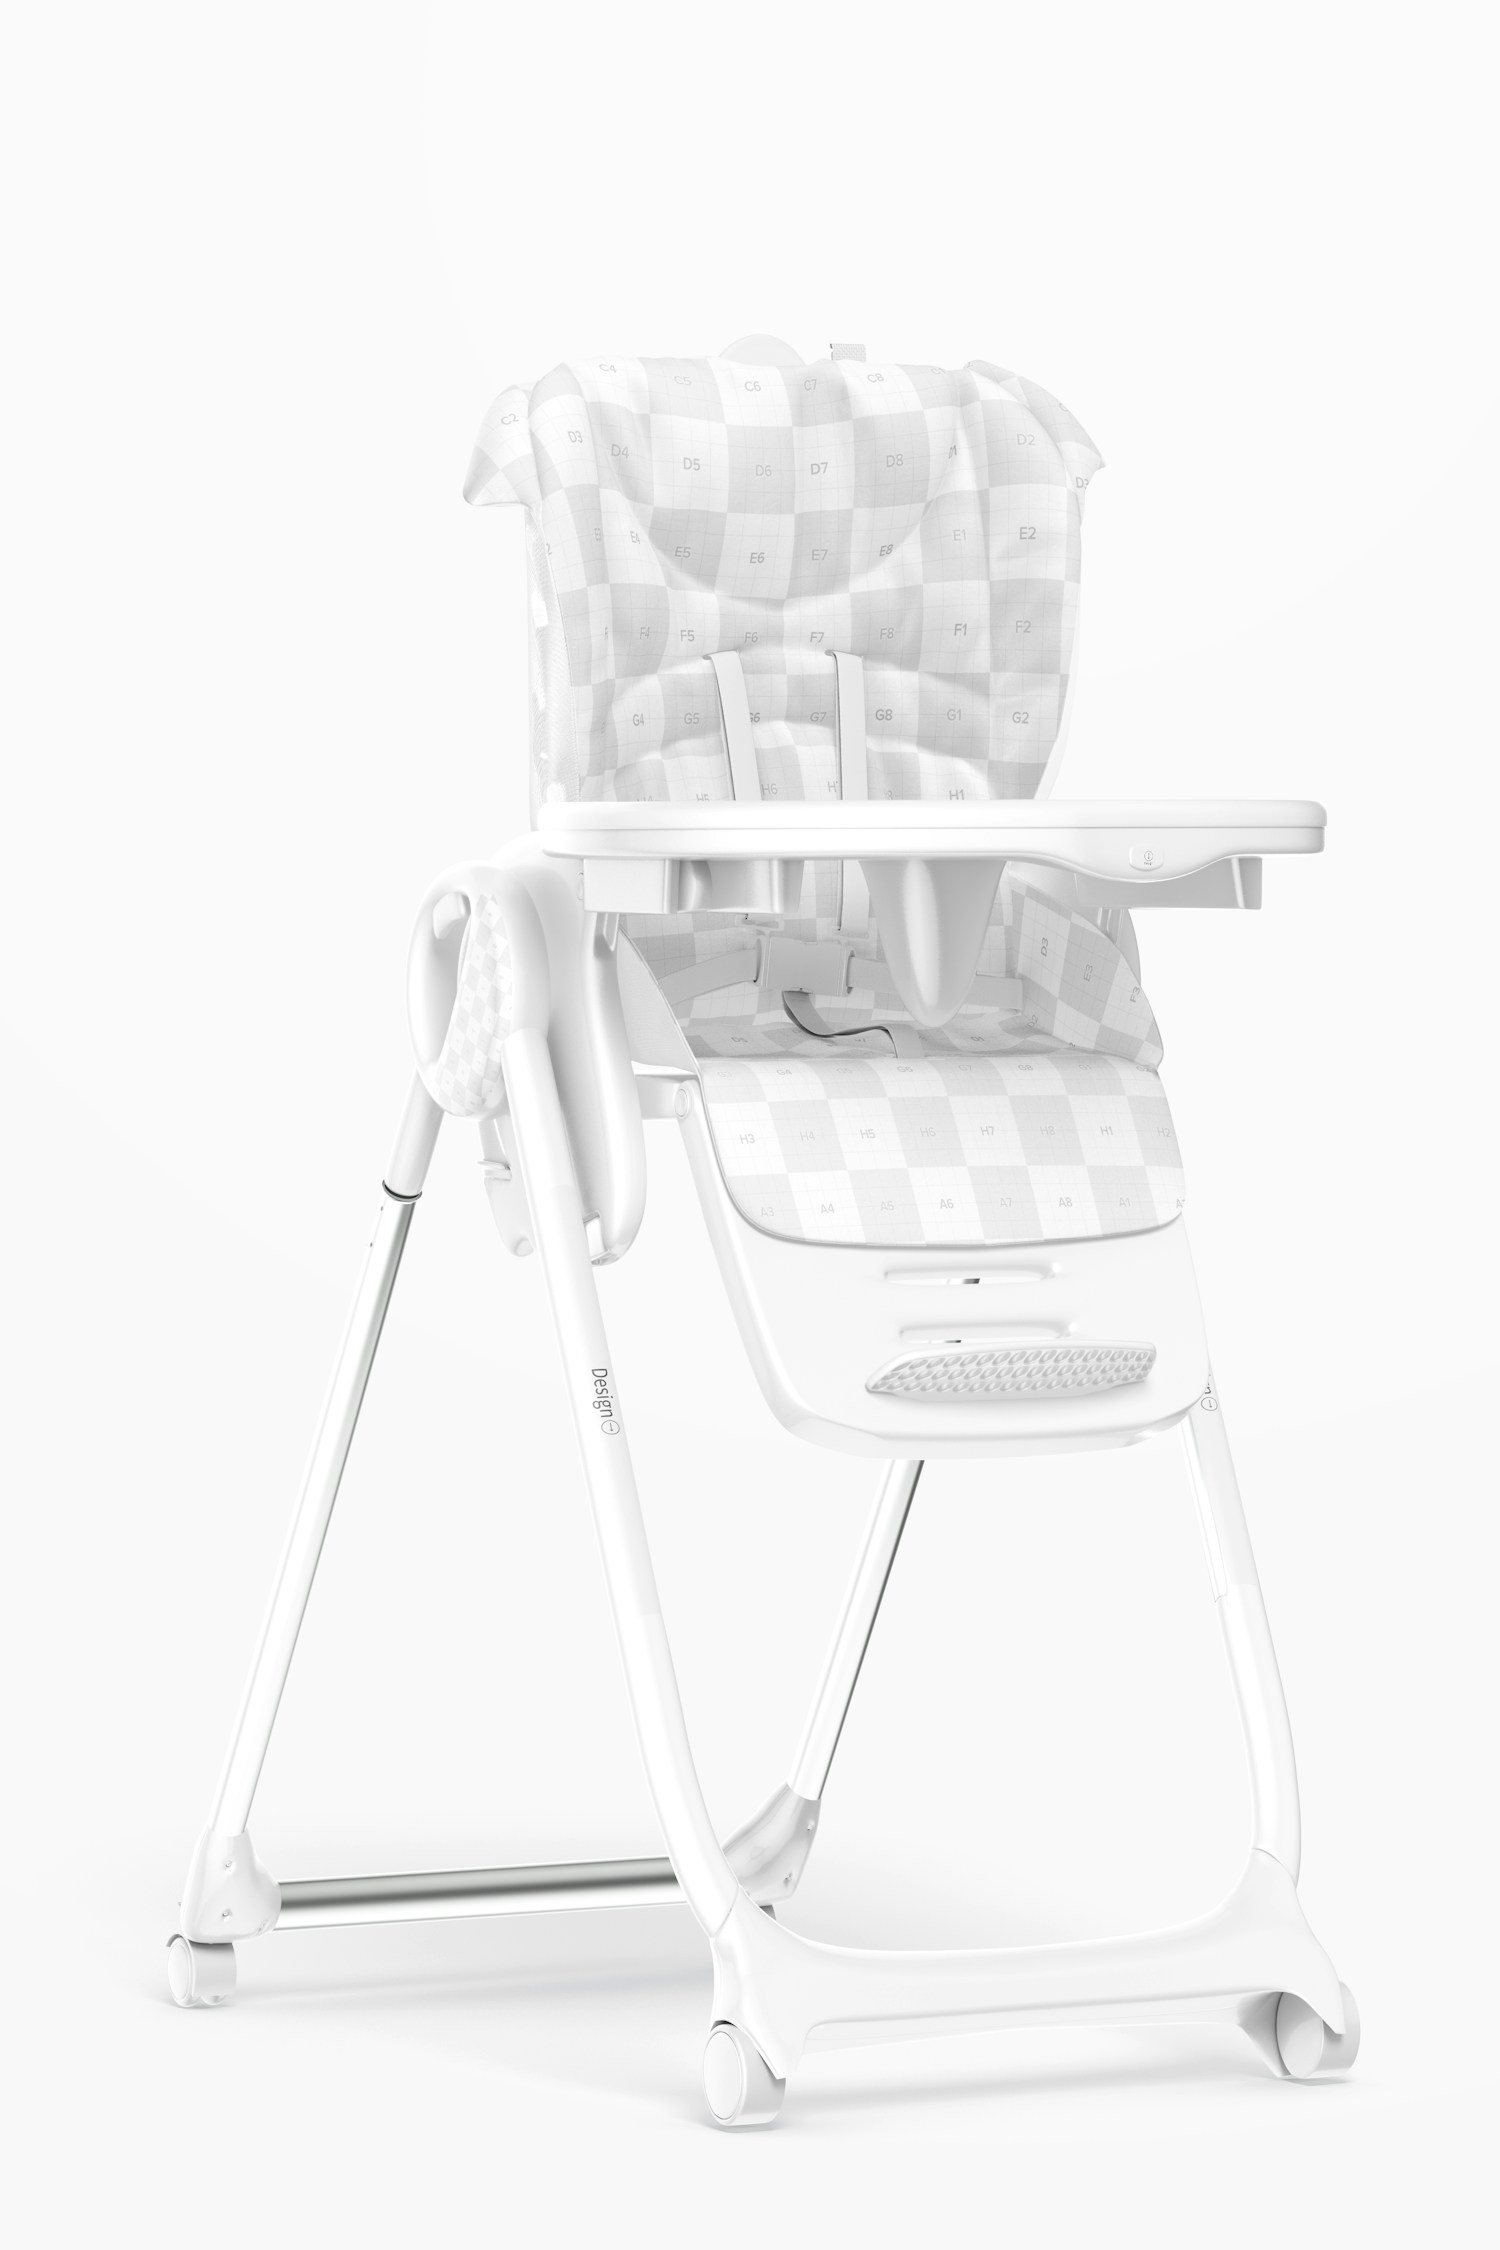 Baby Feeding Chair Mockup, Right View